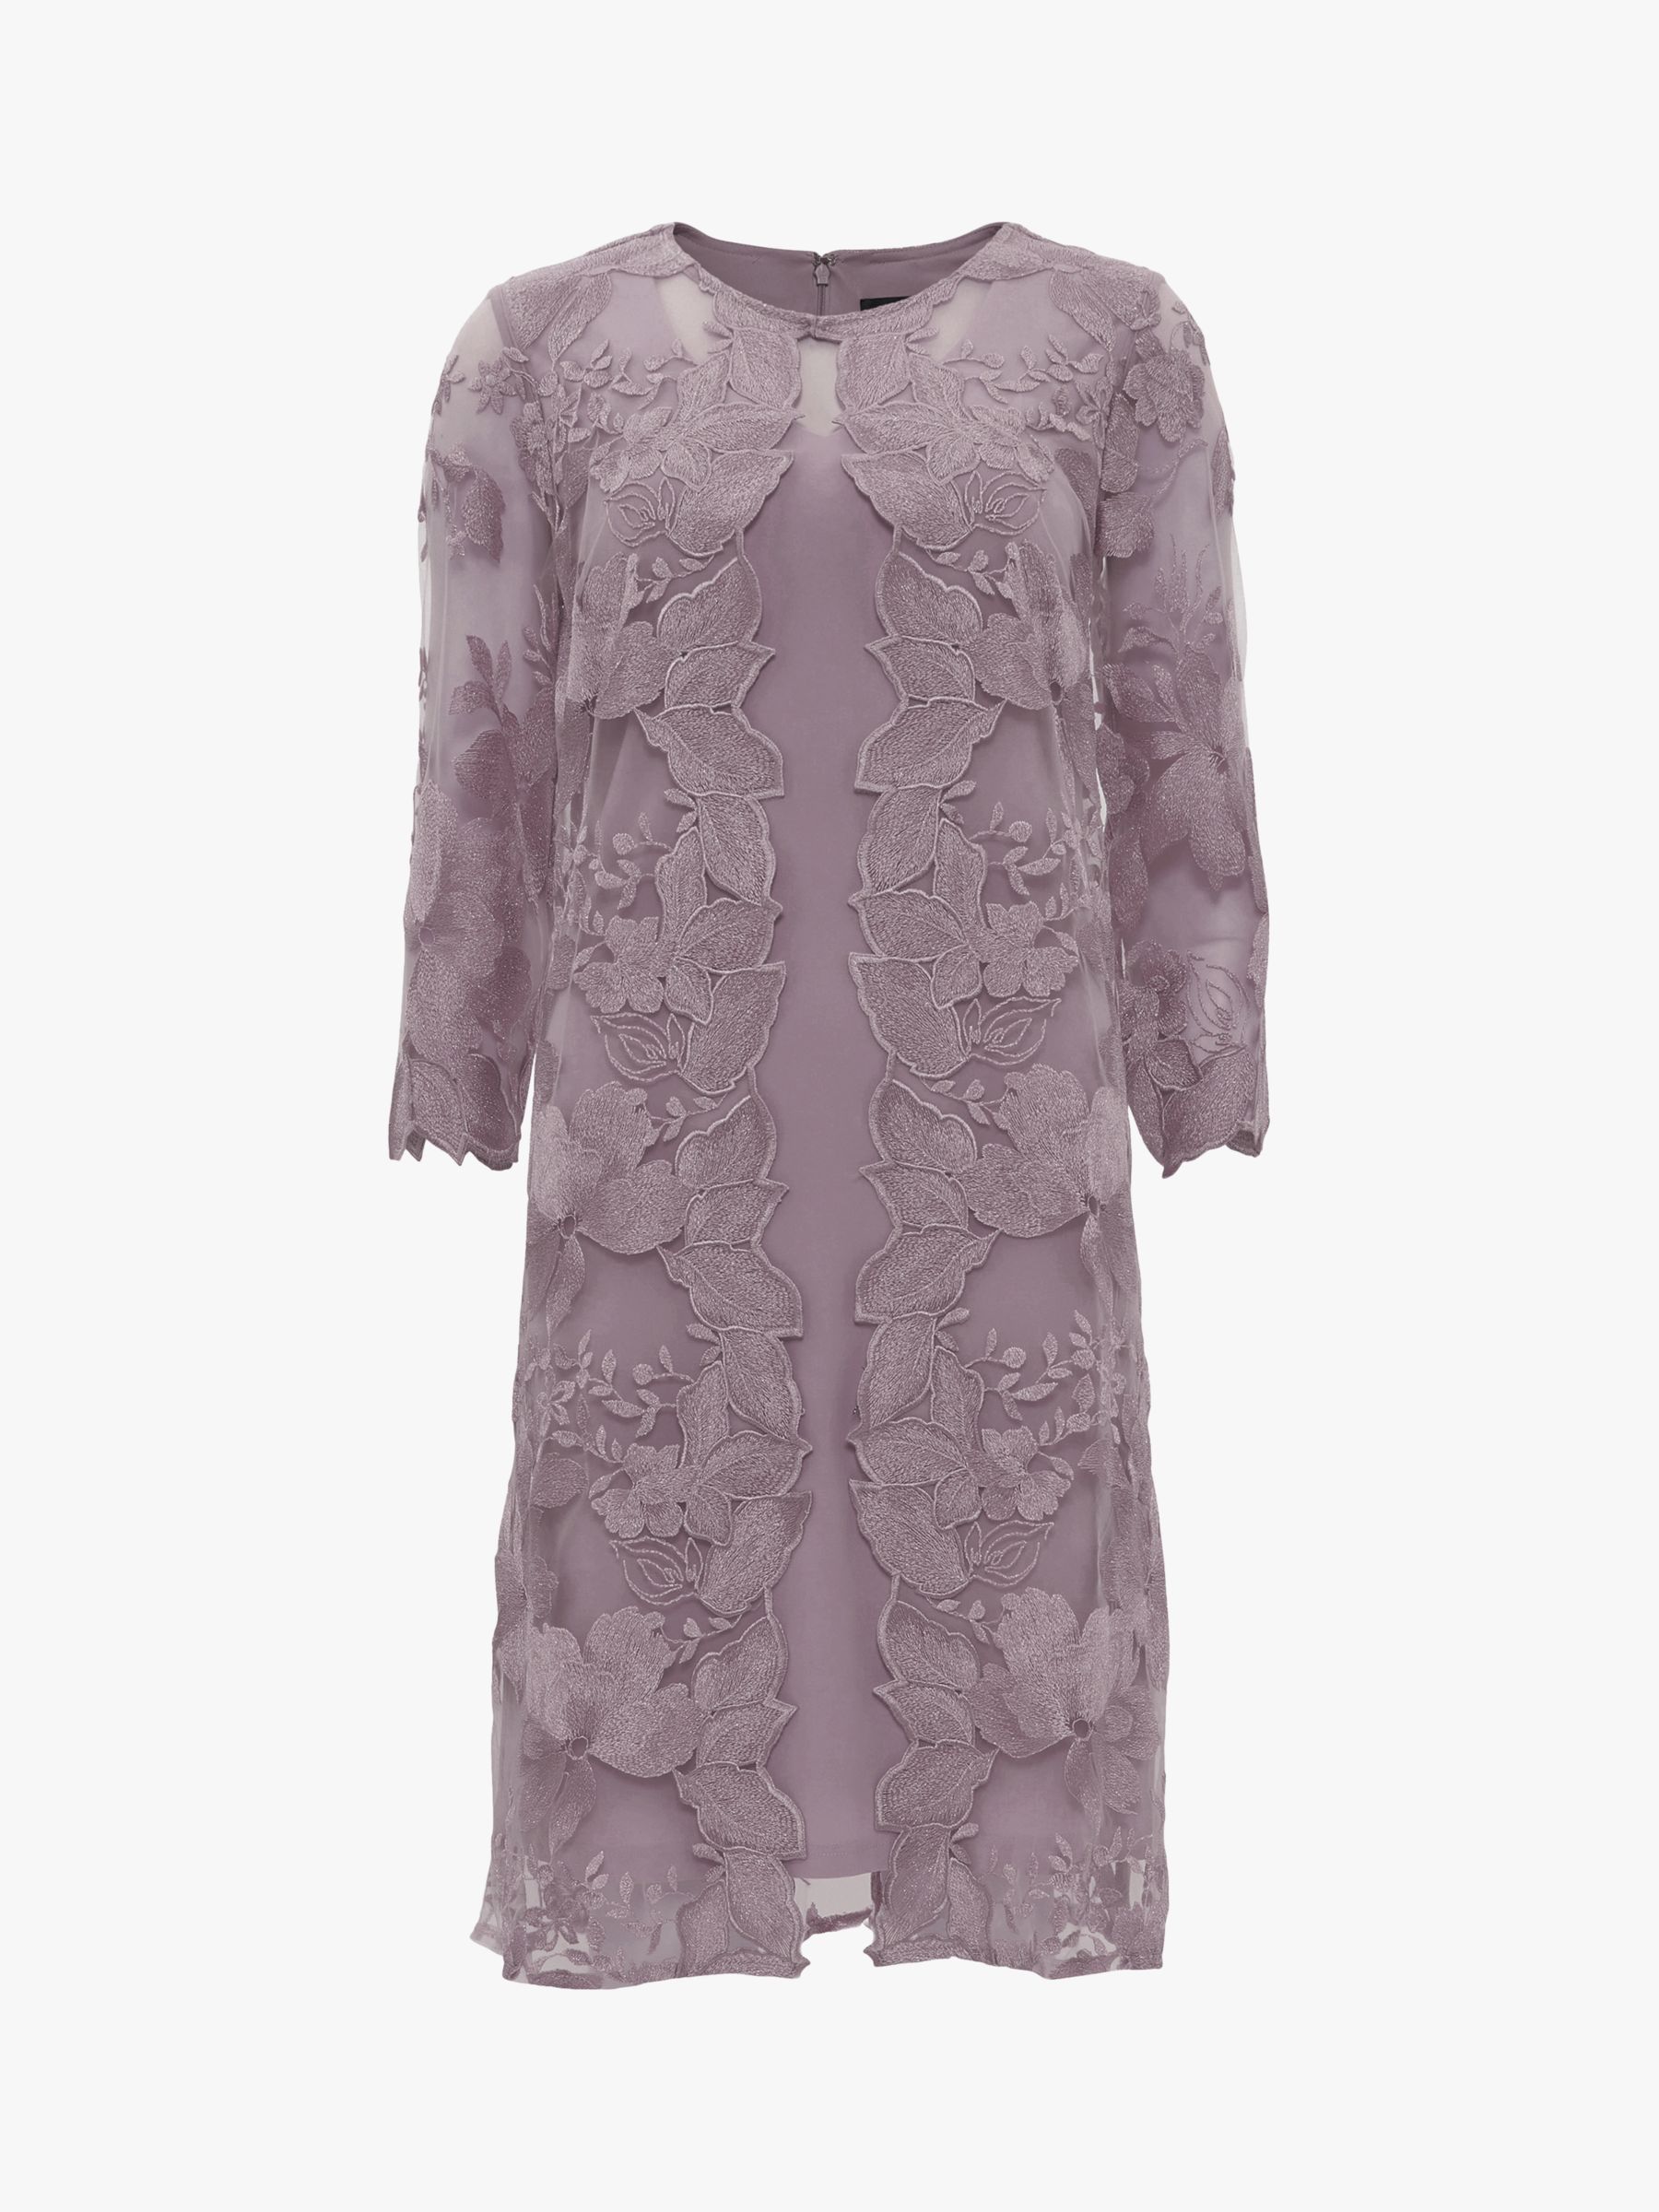 Gina Bacconi Savoy Lace Dress, Orchid Mist at John Lewis & Partners